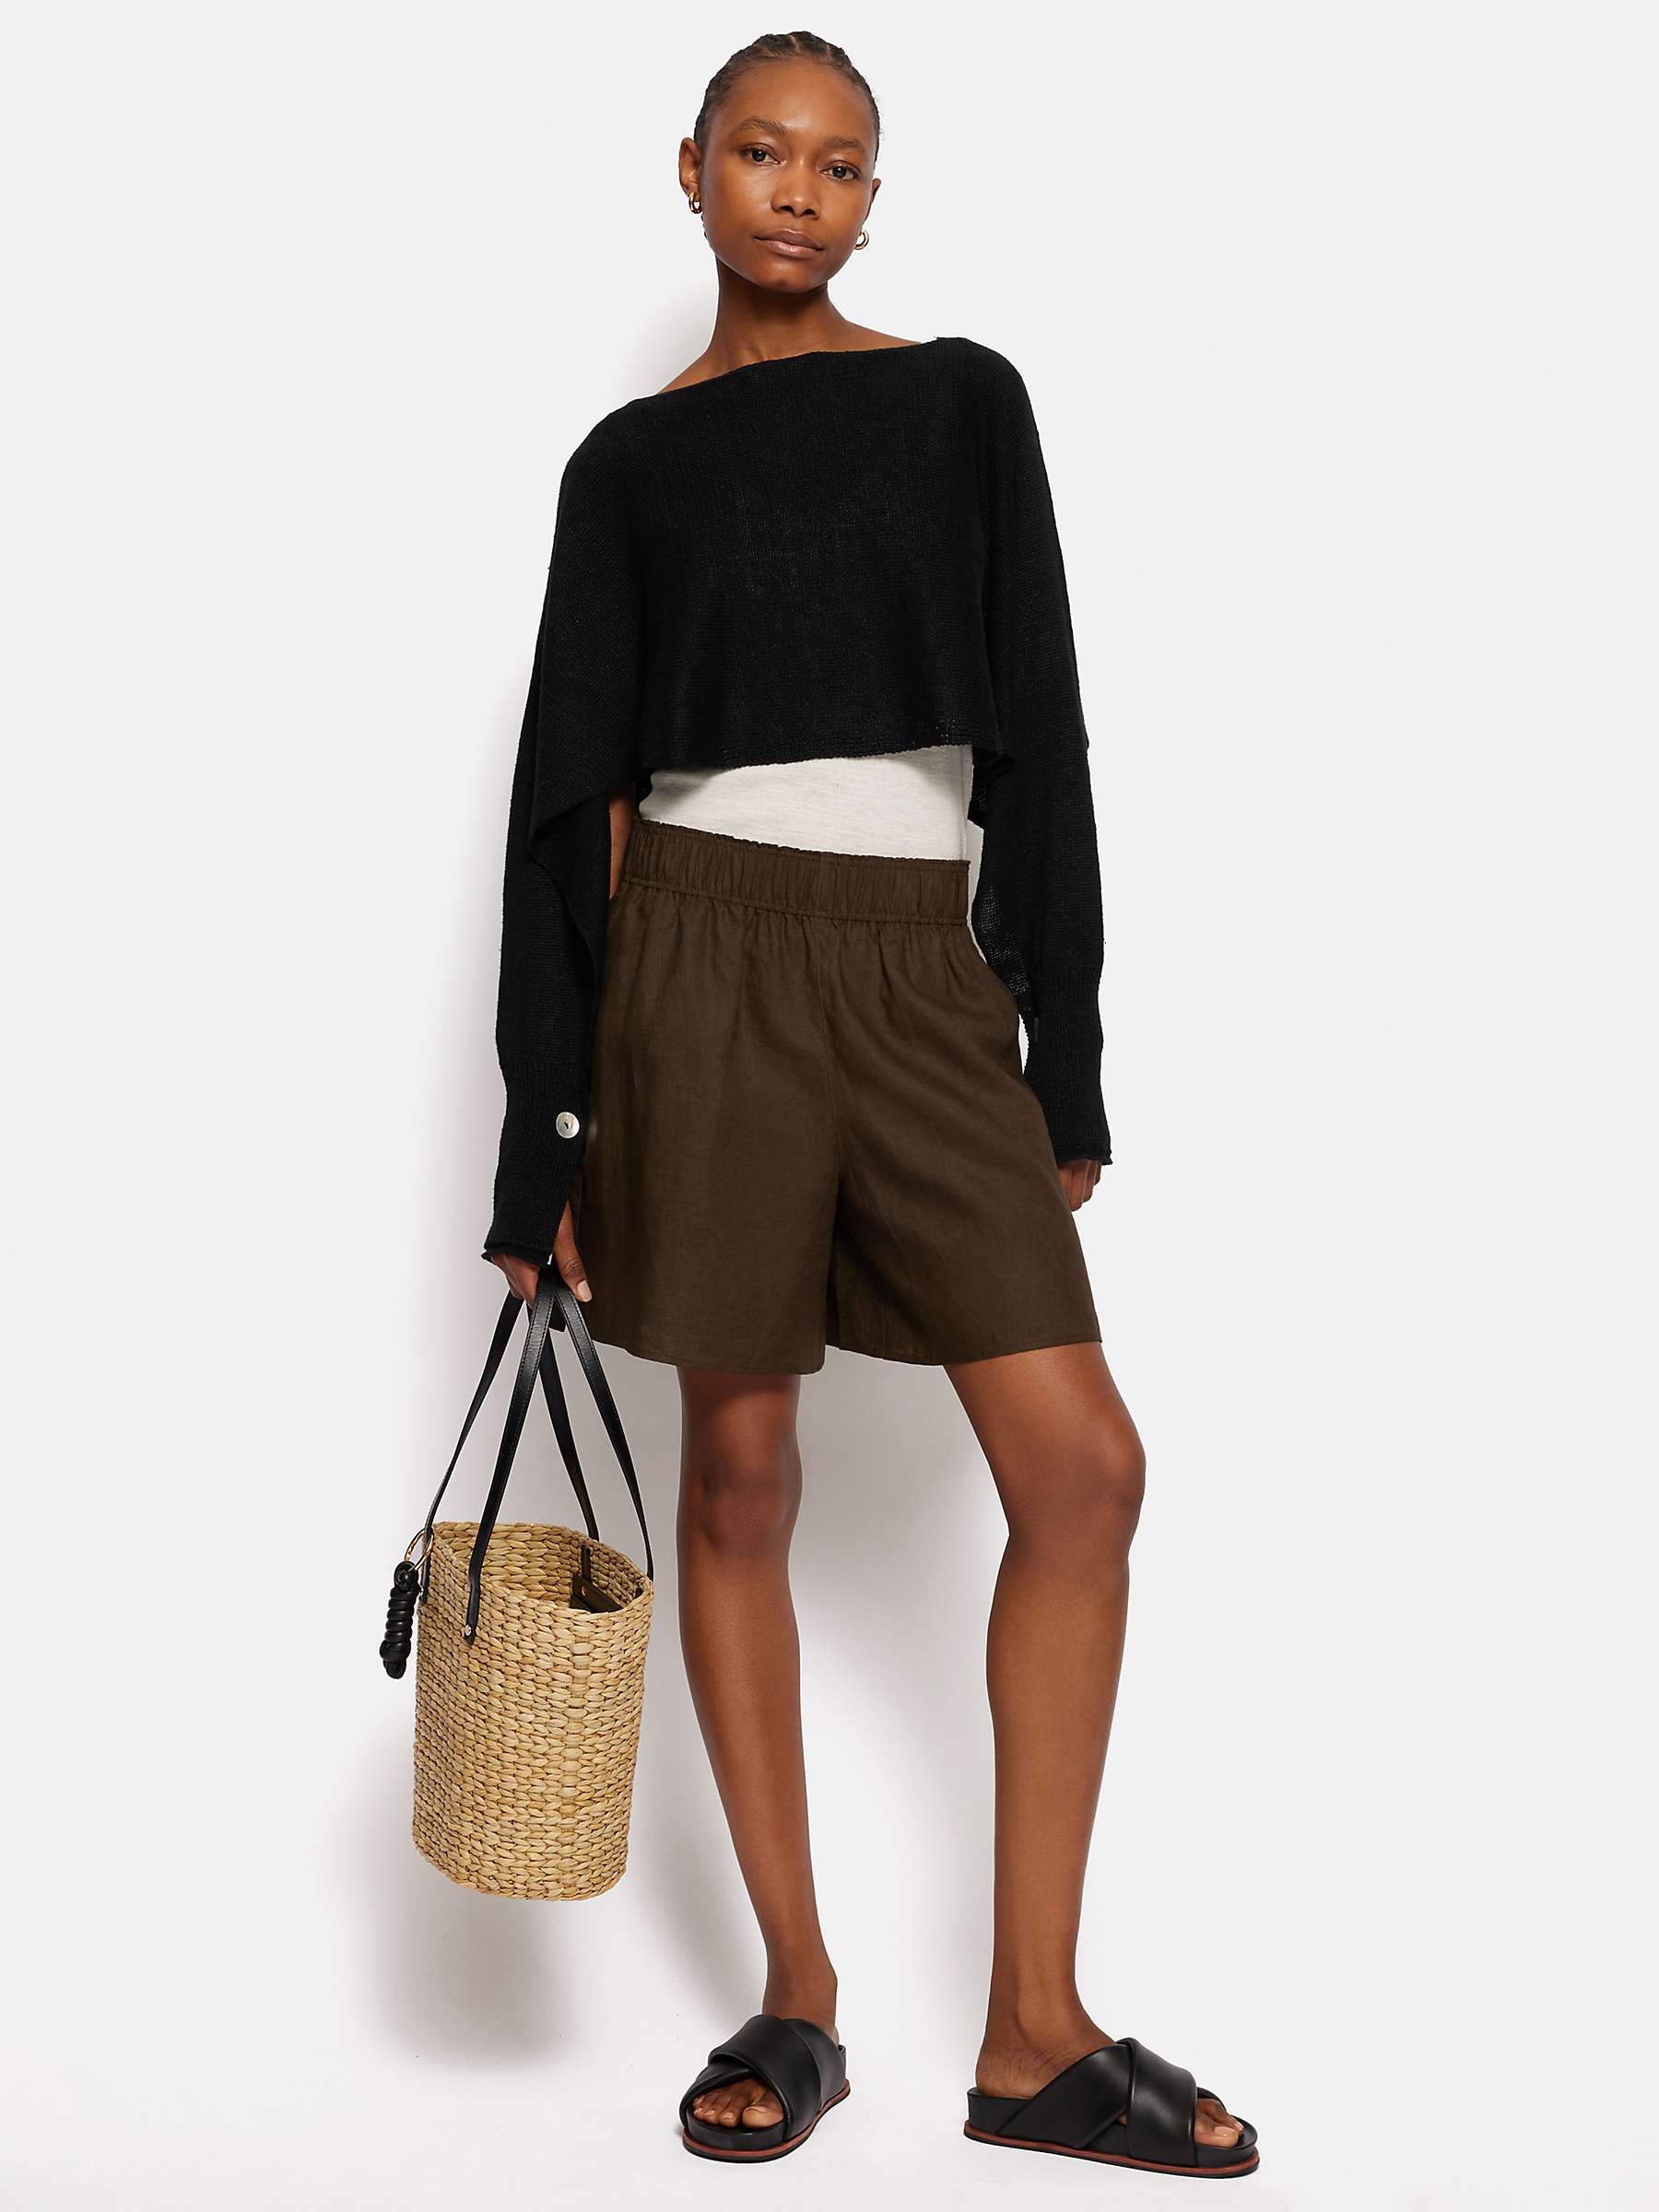 Buy Jigsaw Pure Linen Cropped Poncho Jumper Online at johnlewis.com